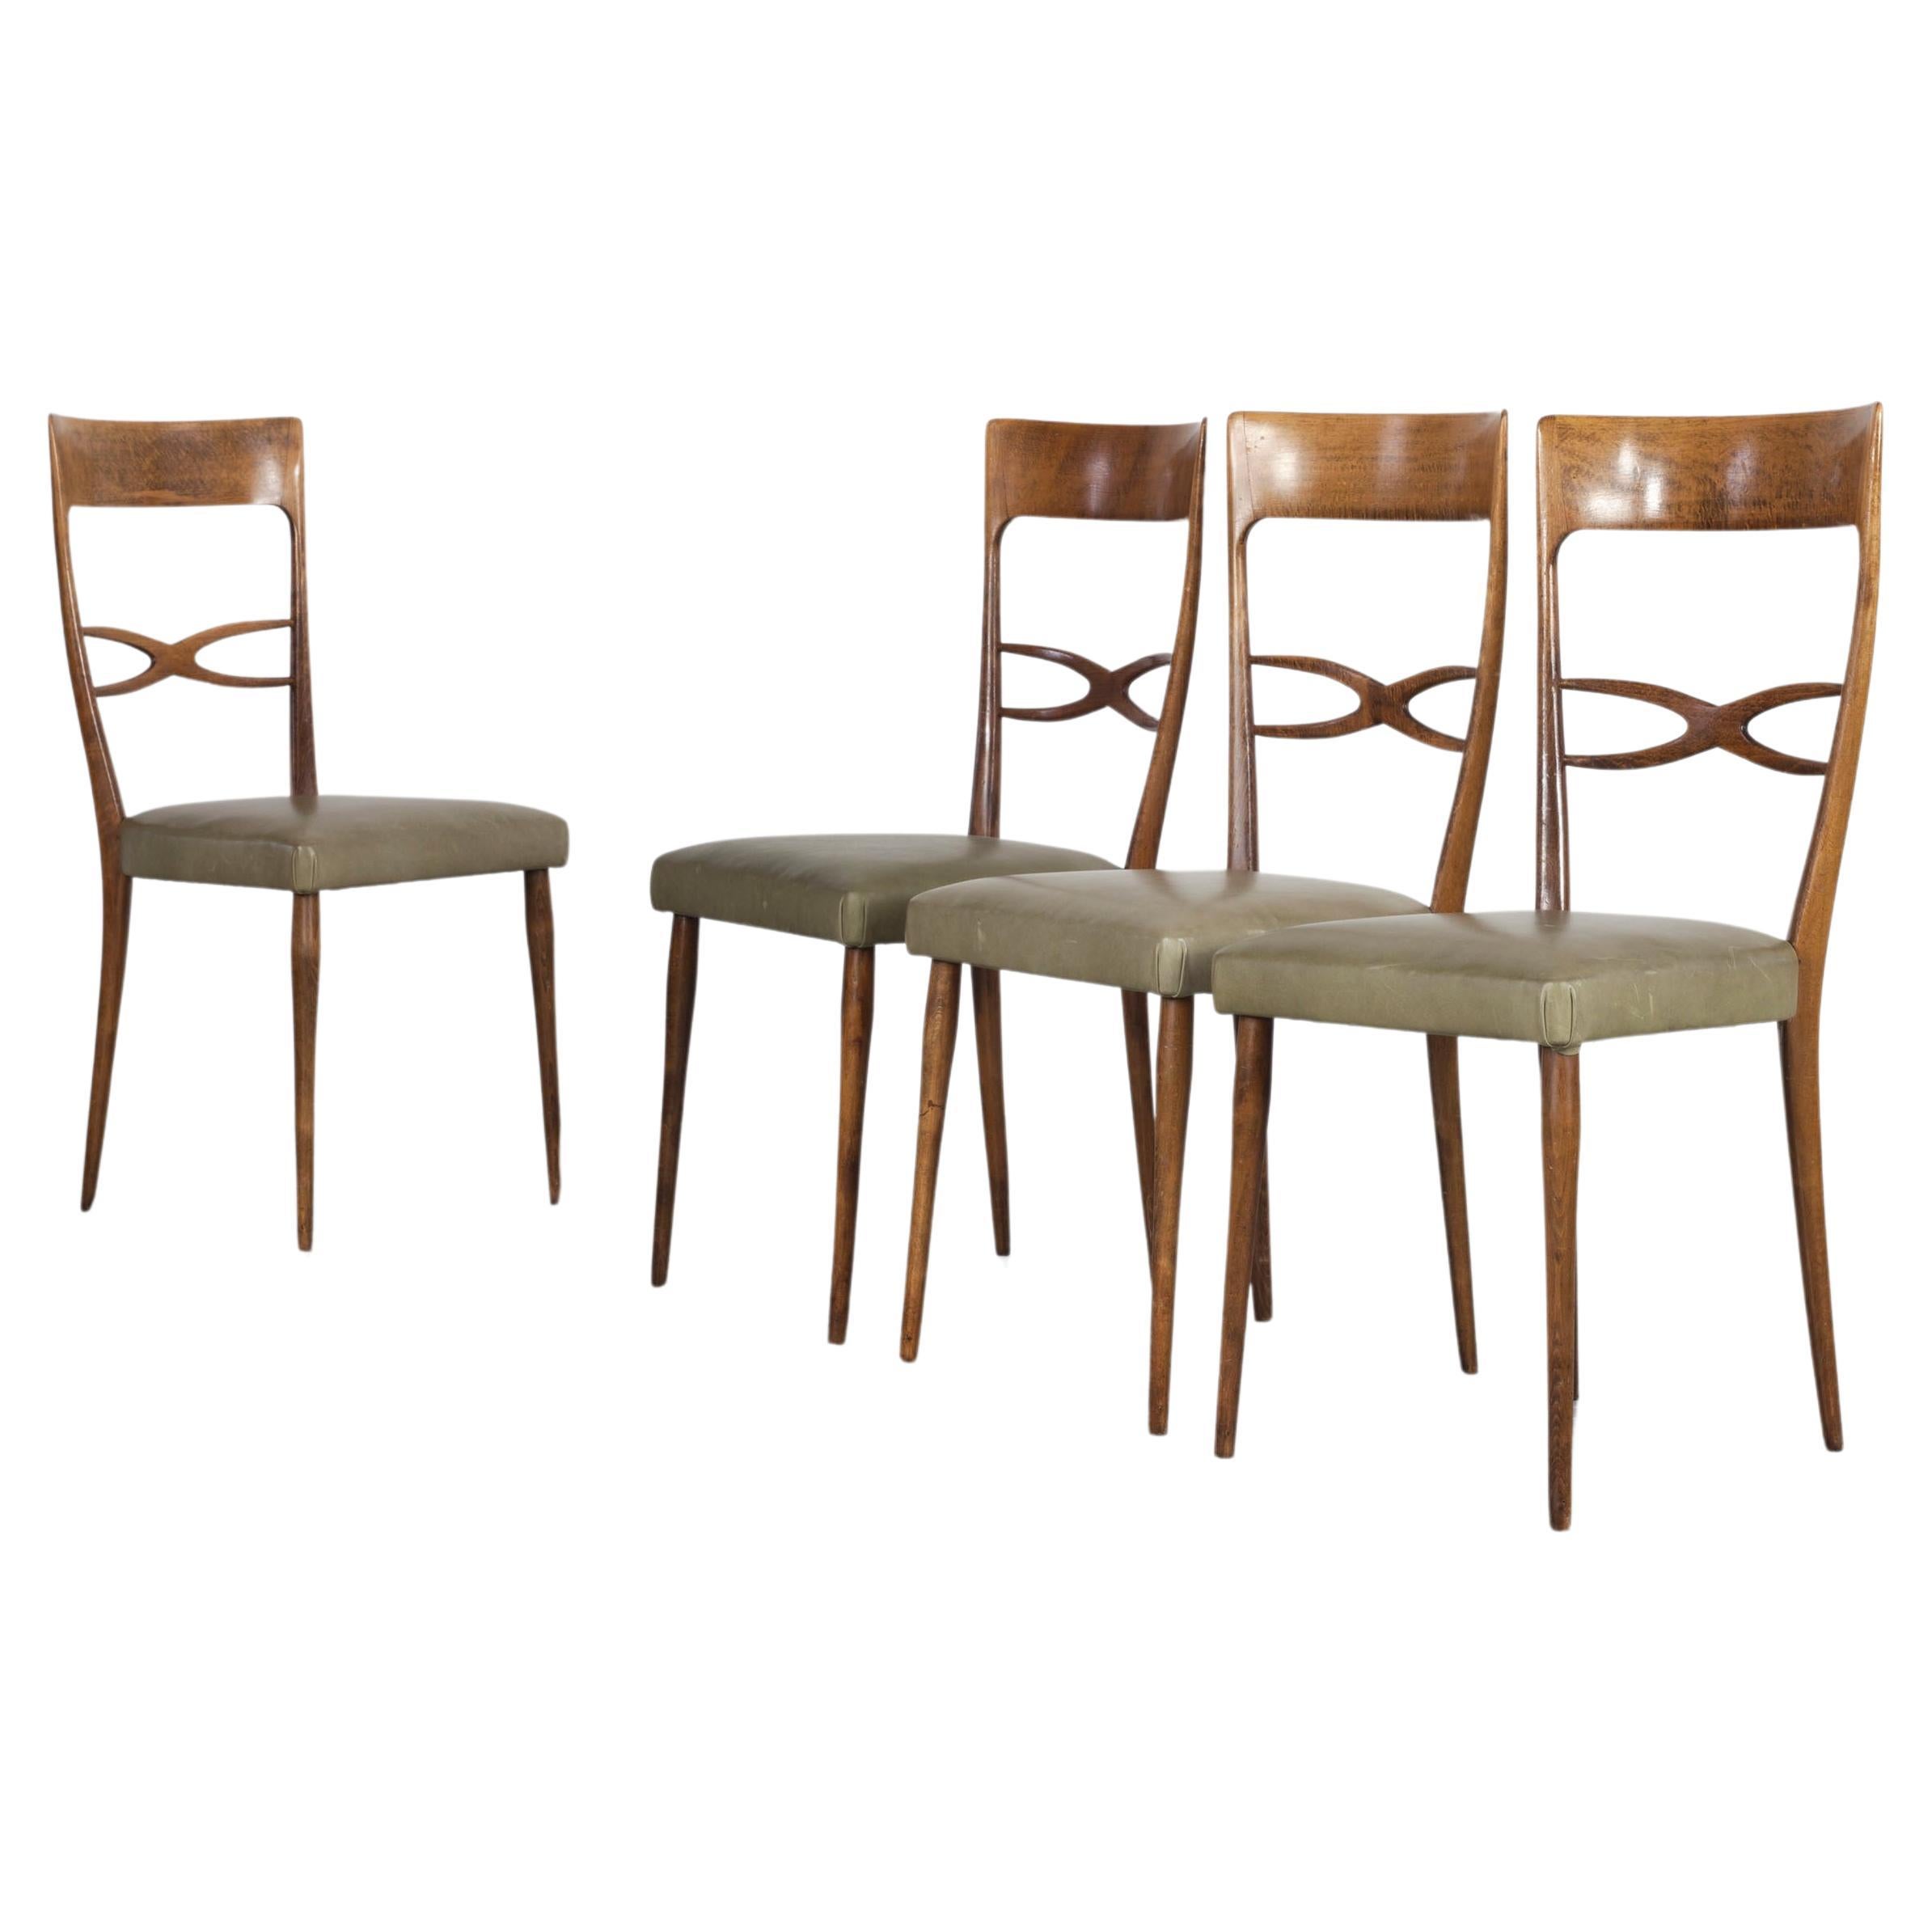 Set of 4 Mid-century dining chairs, made by Consorzio Sedie Friuli, Italy 1950s